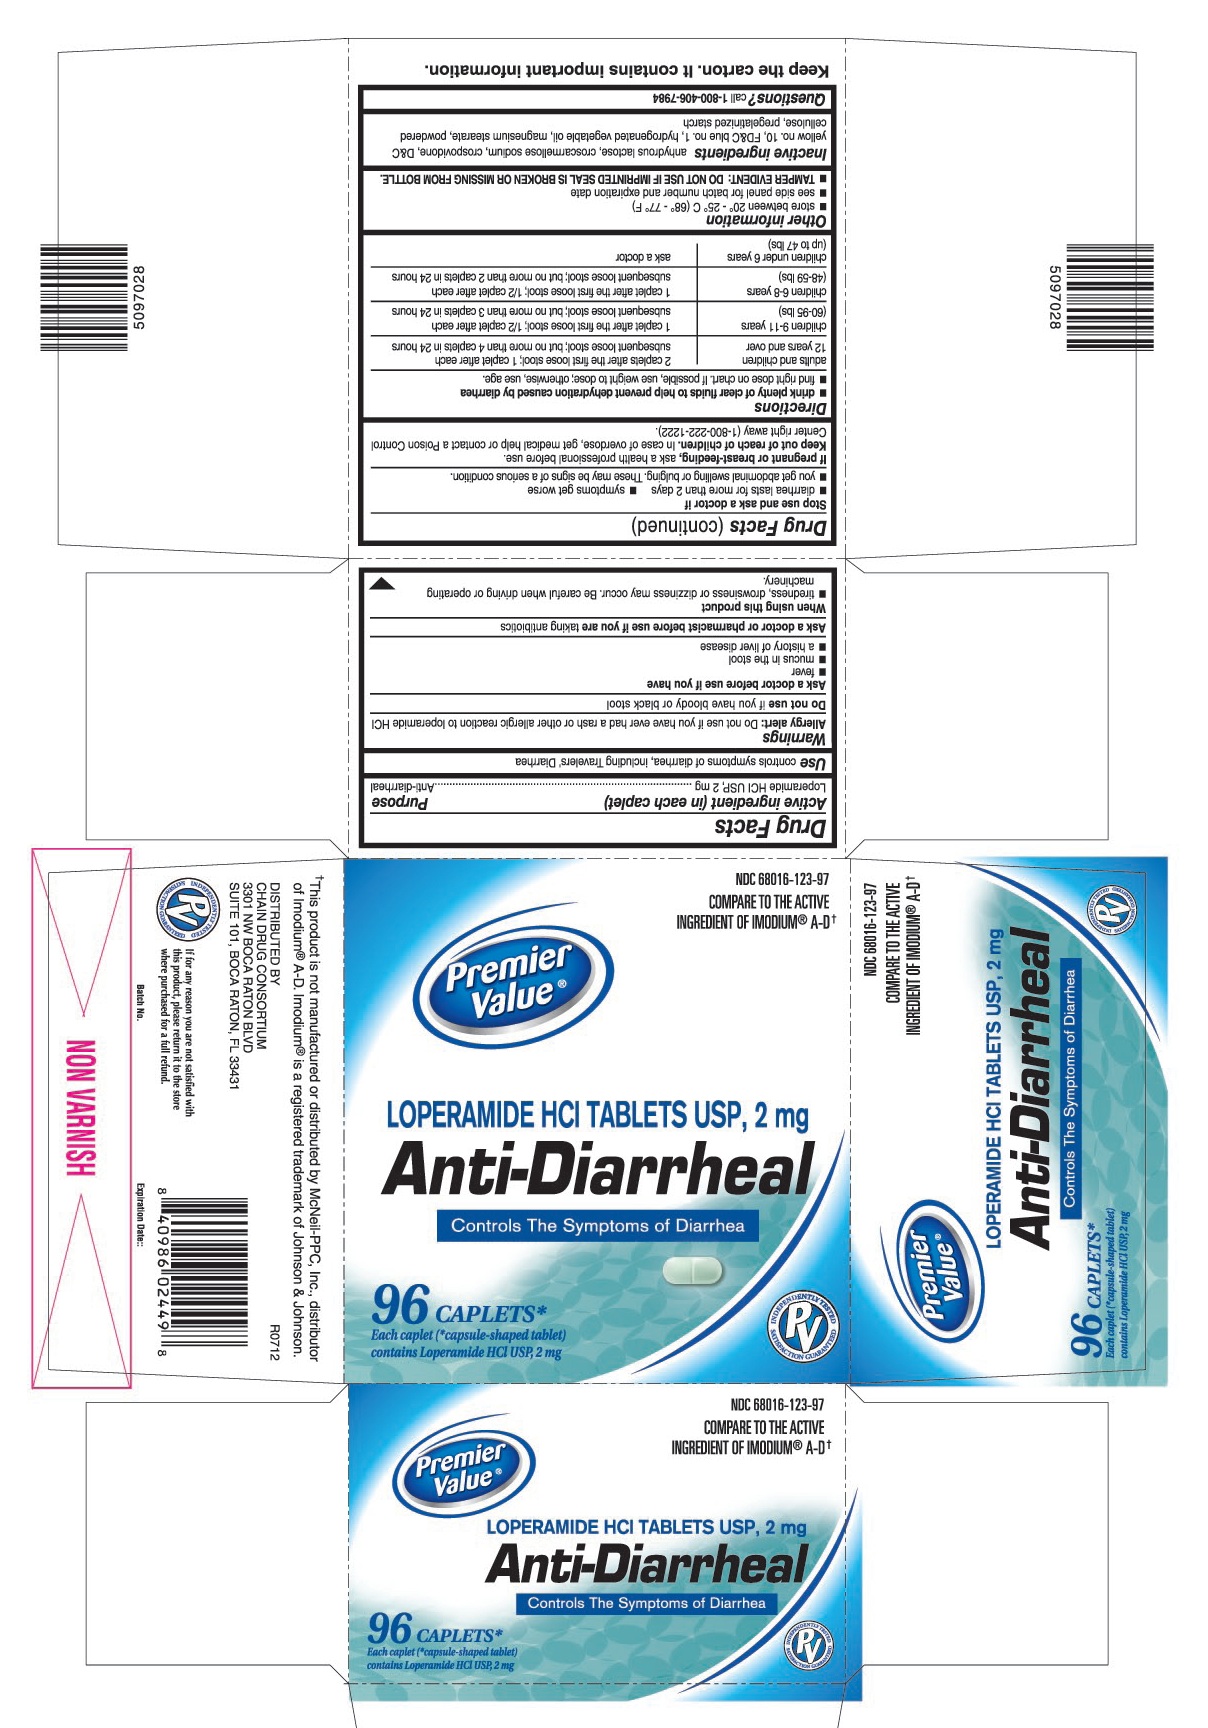 This is the 96 count bottle carton label for Loperamide HCl tablets USP, 2 mg.